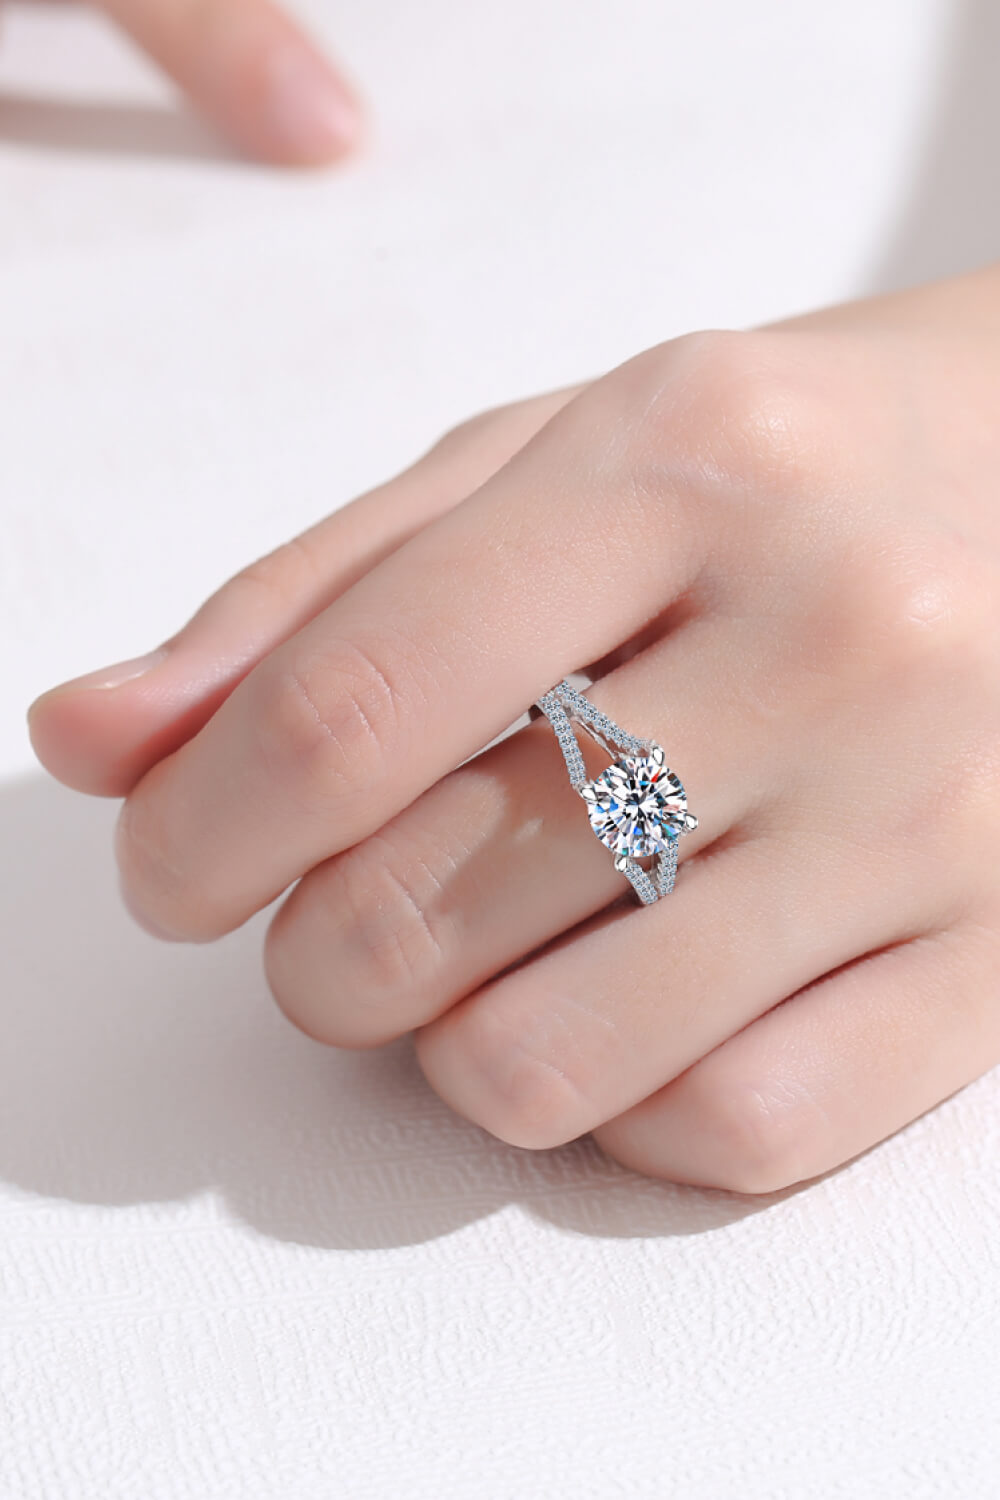 Stylish Moissanite Sterling Silver Ring-Rings-Inspired by Justeen-Women's Clothing Boutique in Chicago, Illinois